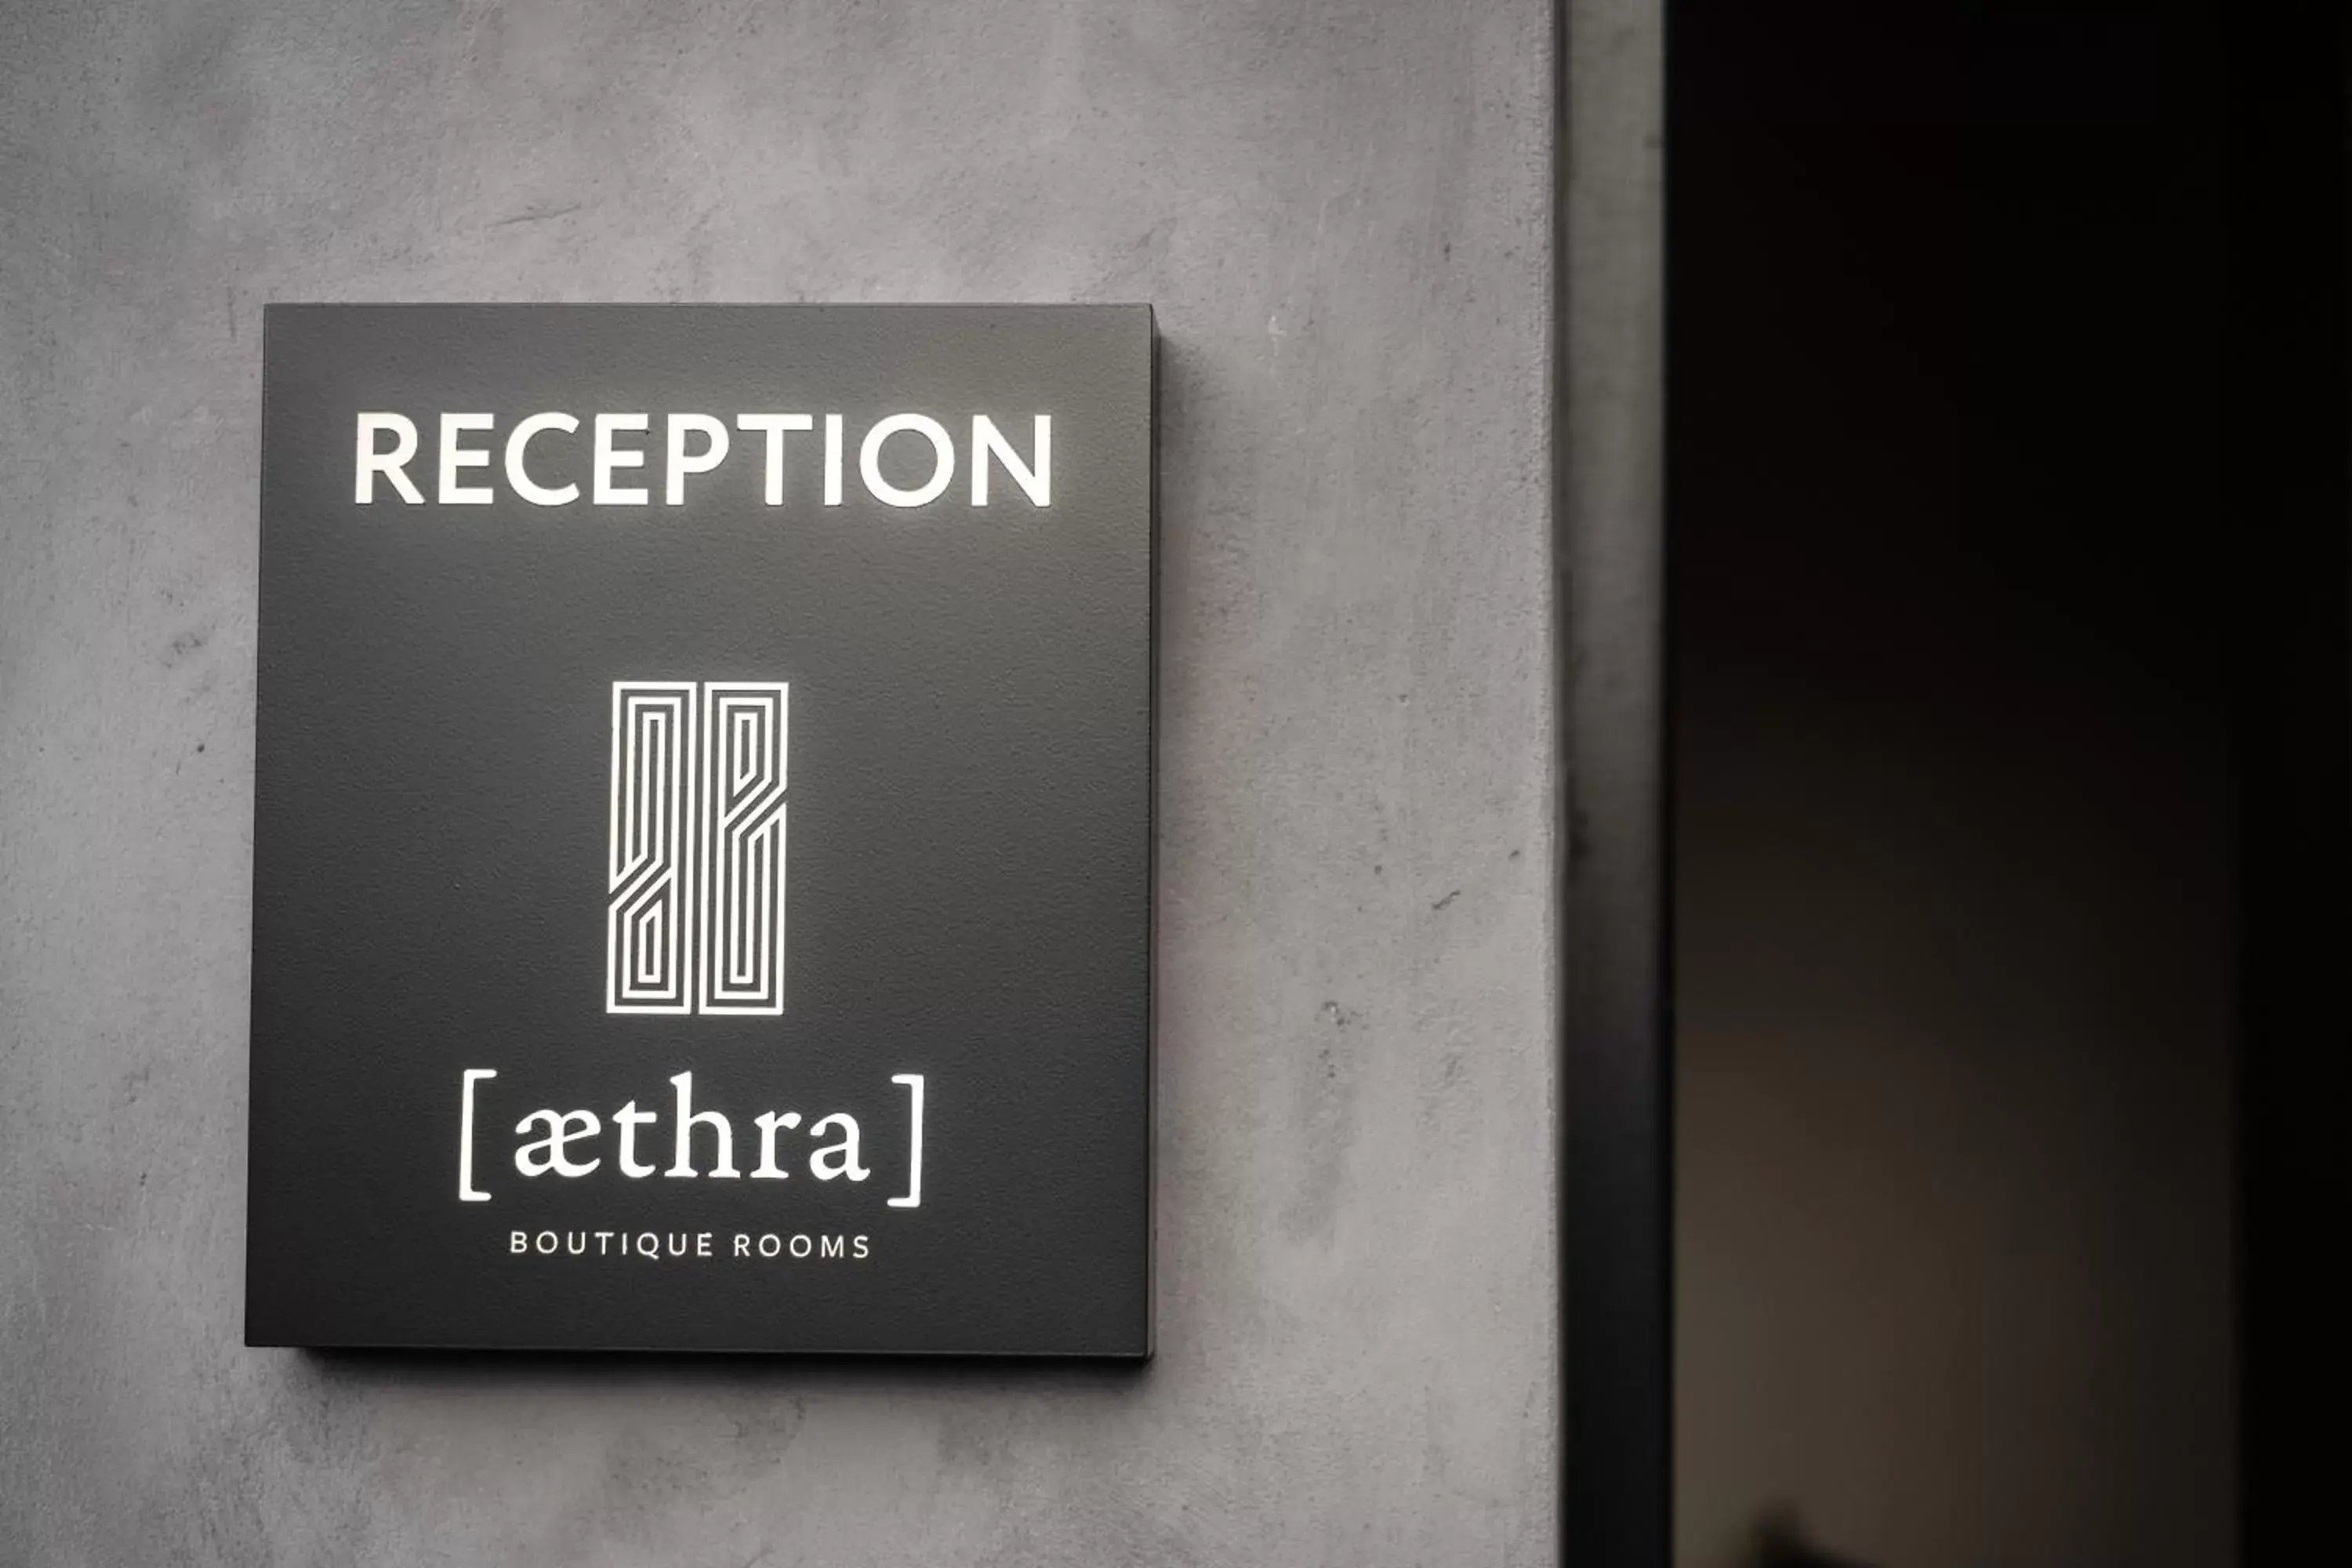 Property logo or sign in Aethra Boutique Rooms